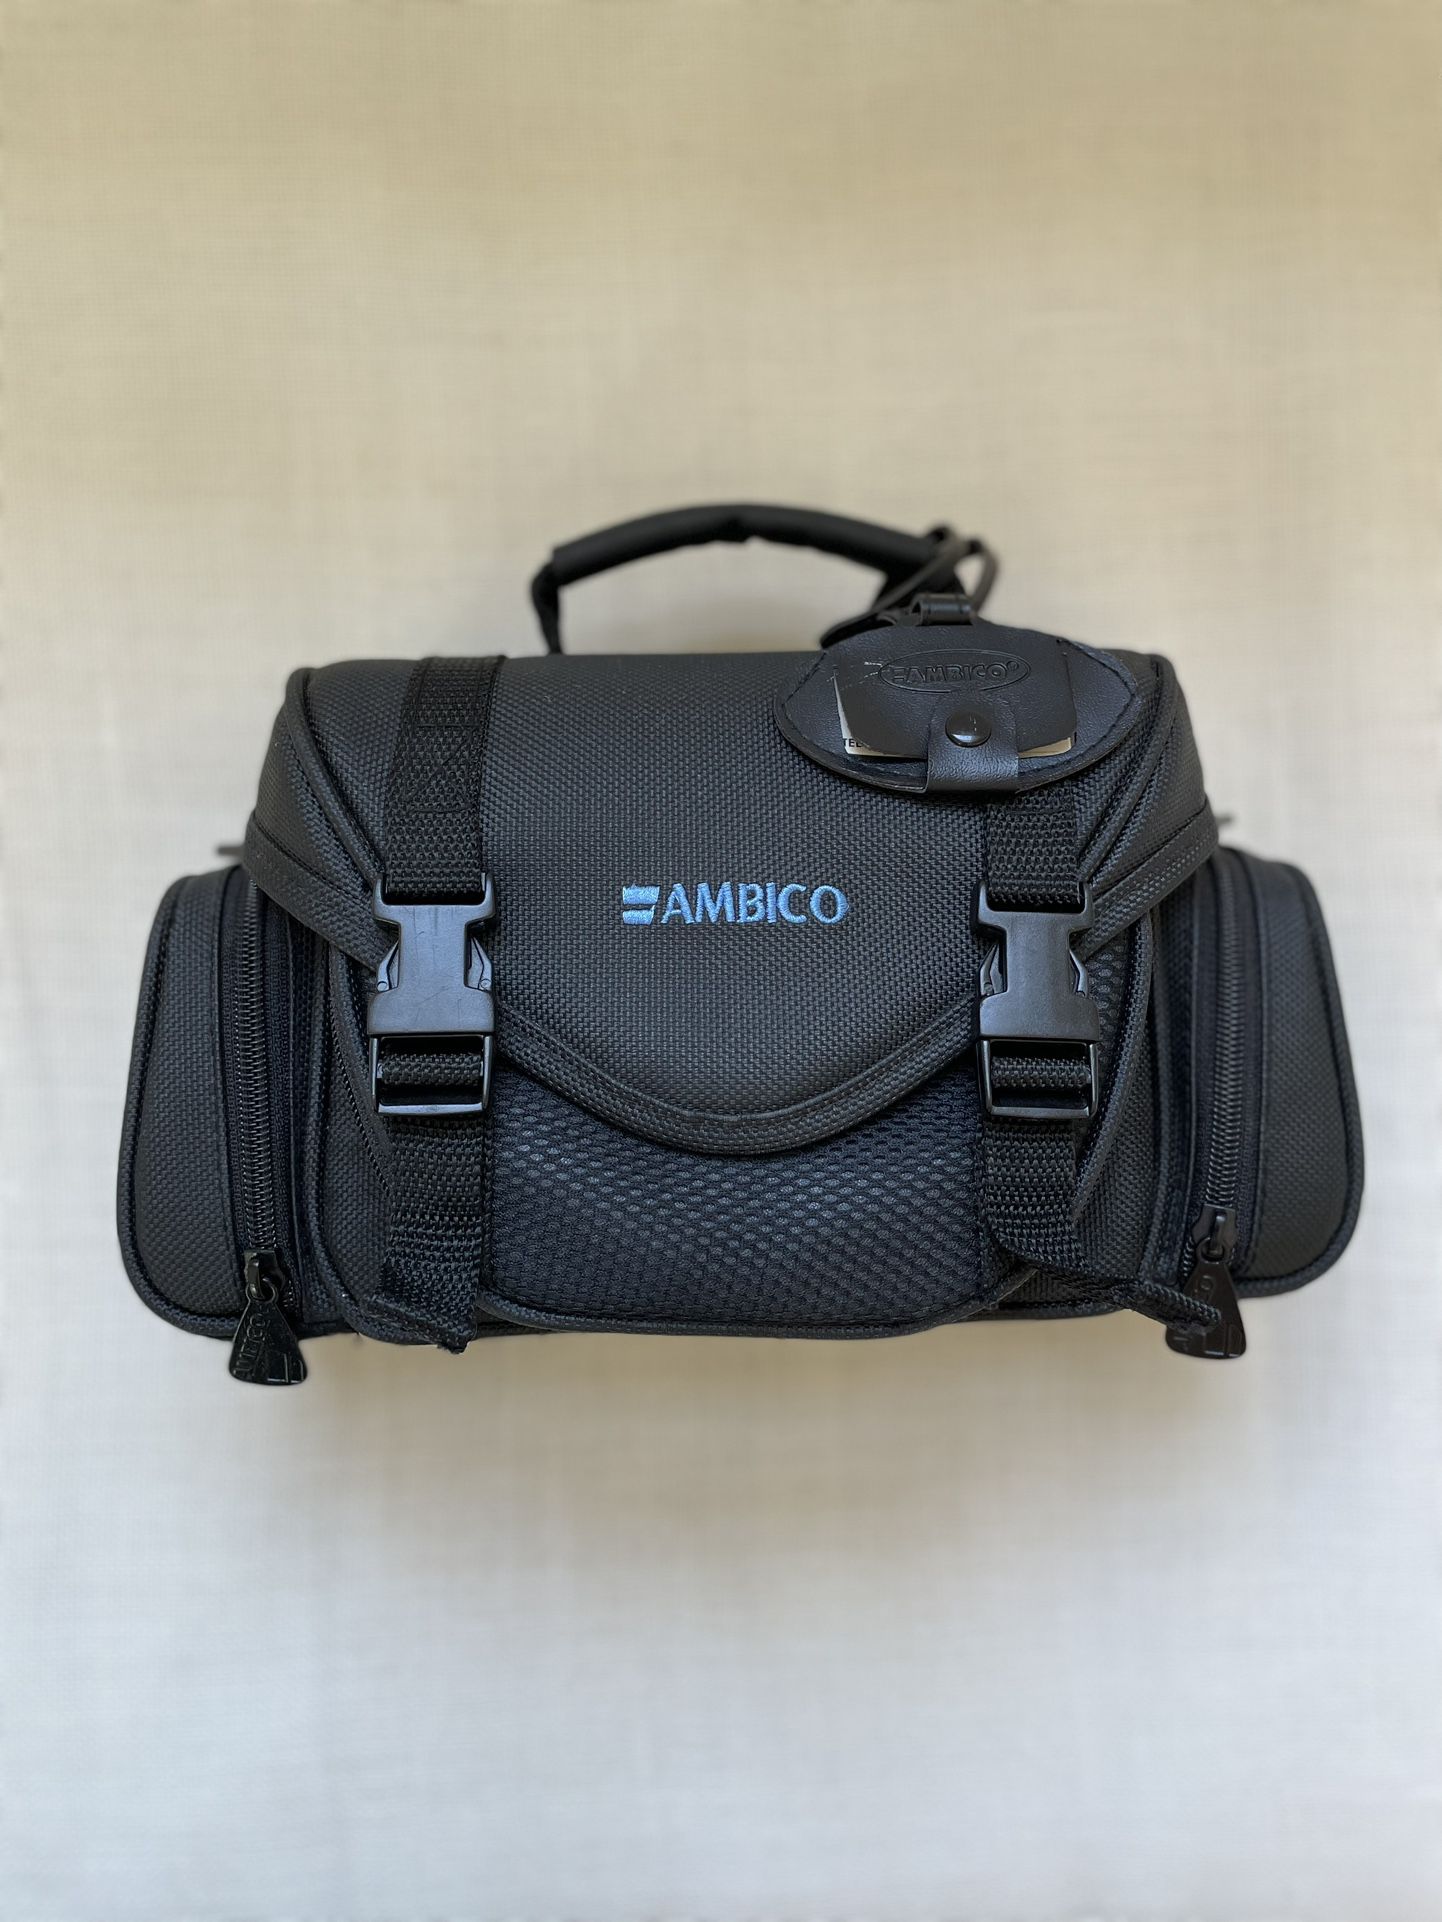 Genuine Ambico Camera Camcorder Bag Only